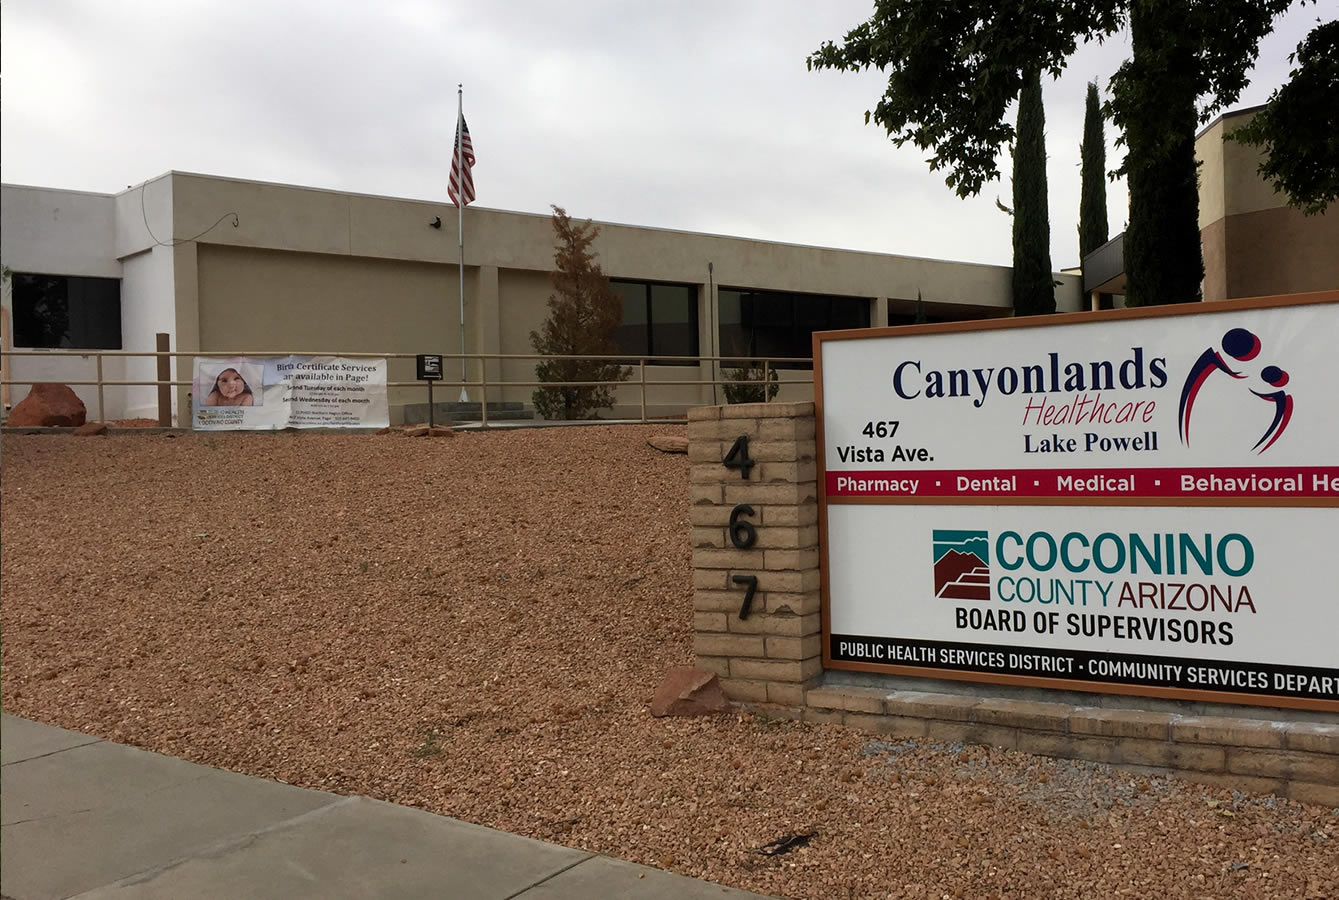 Canyonlands Healthcare - Lake Powell Medical Center